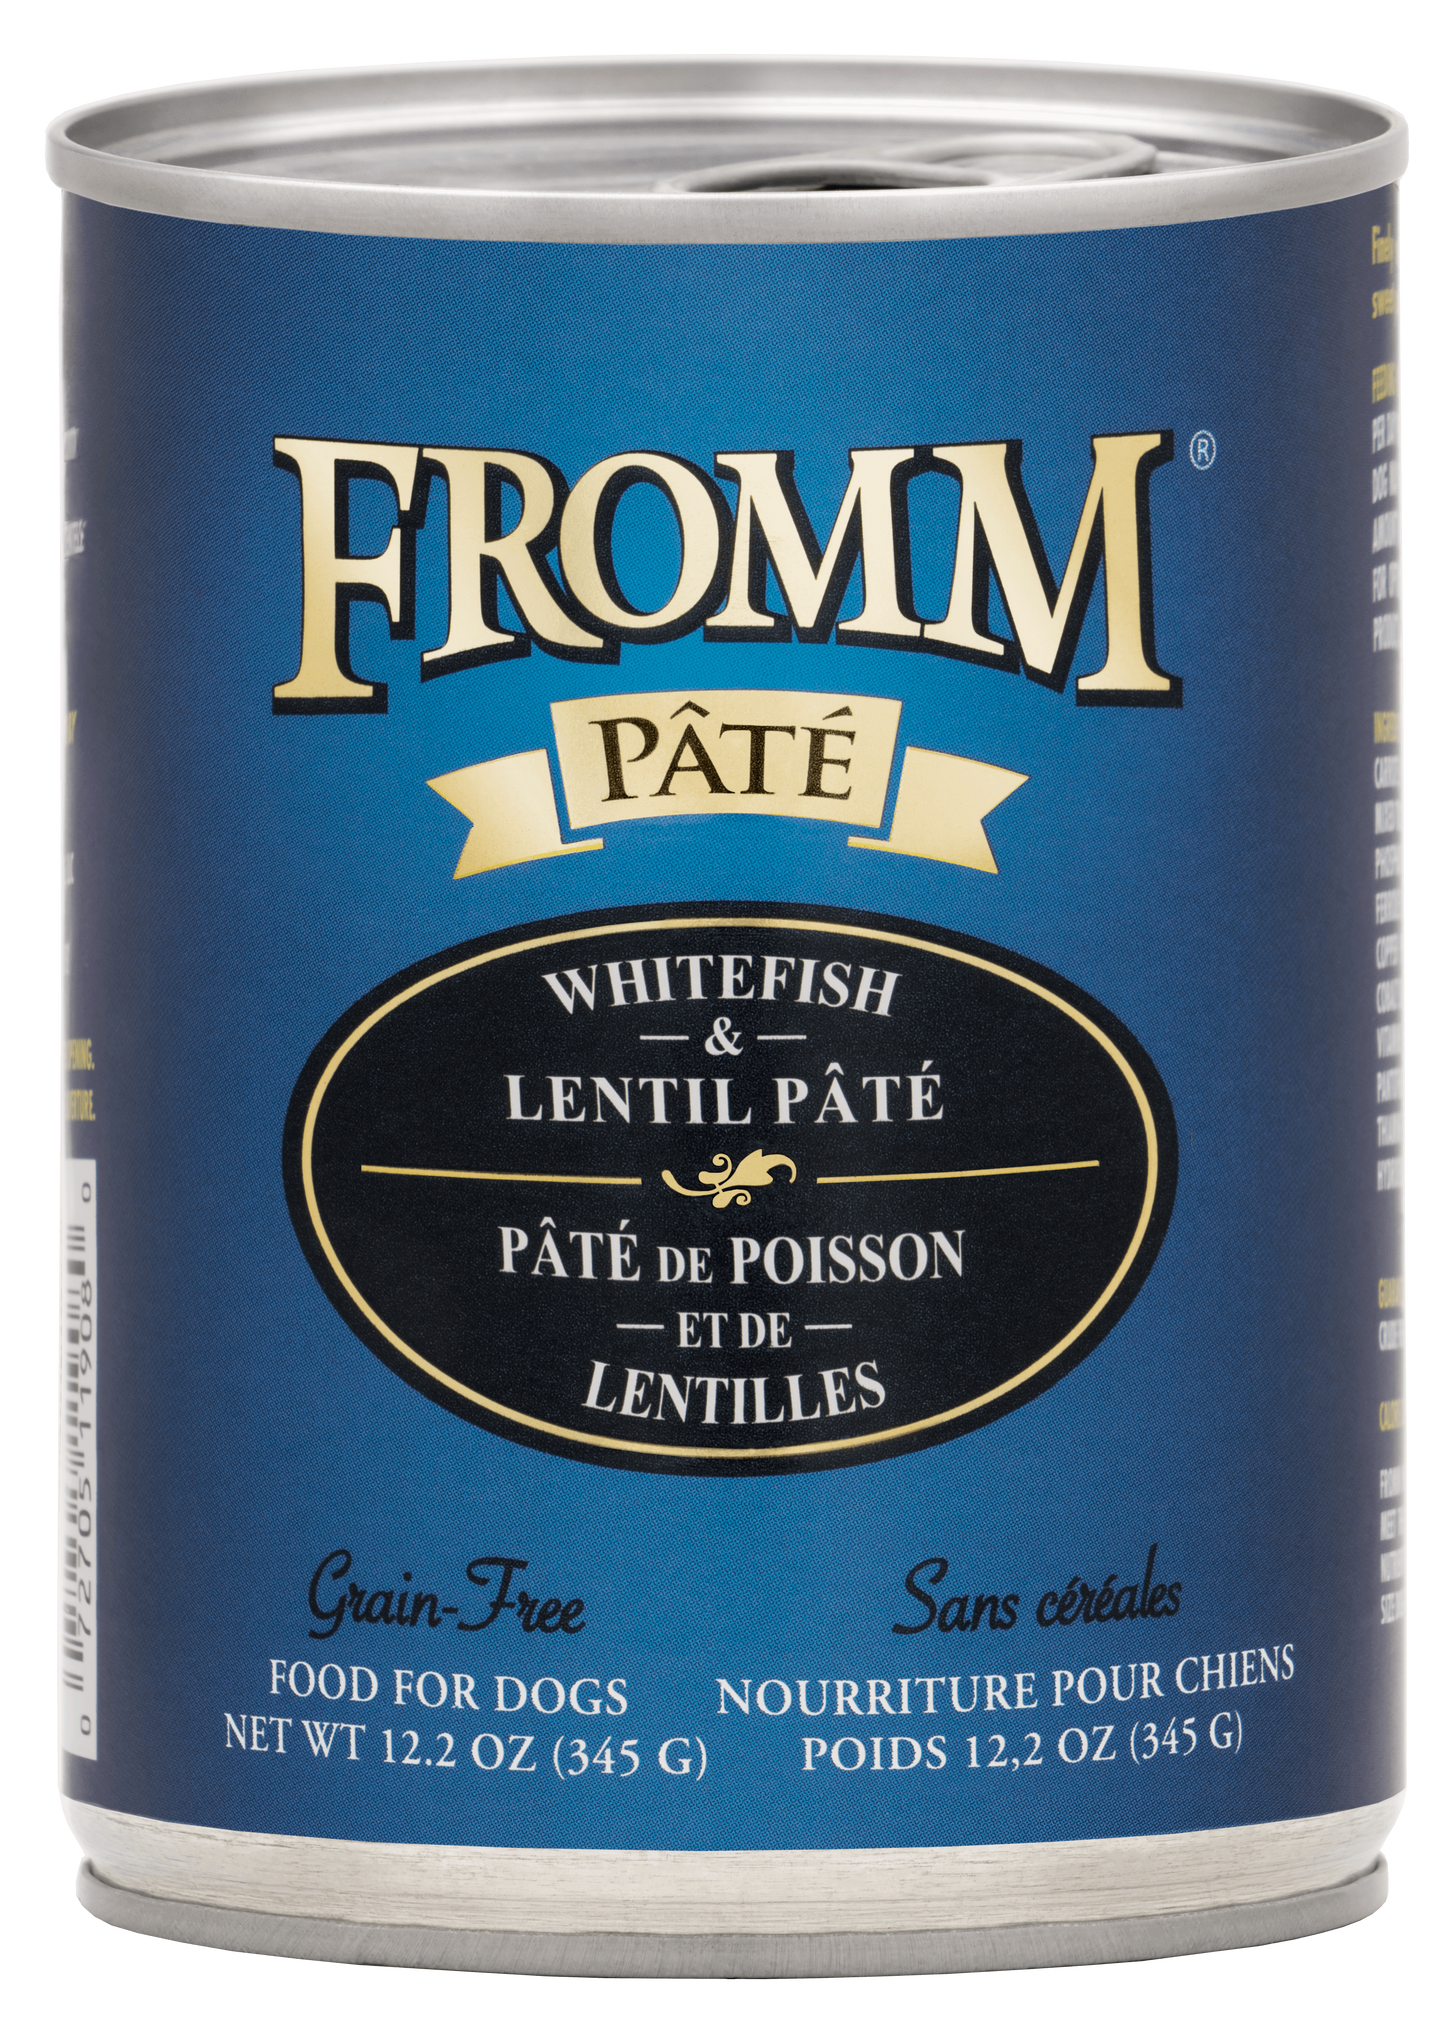 Fromm Whitefish & Lentil Pâté Food for Dogs 12.2 oz